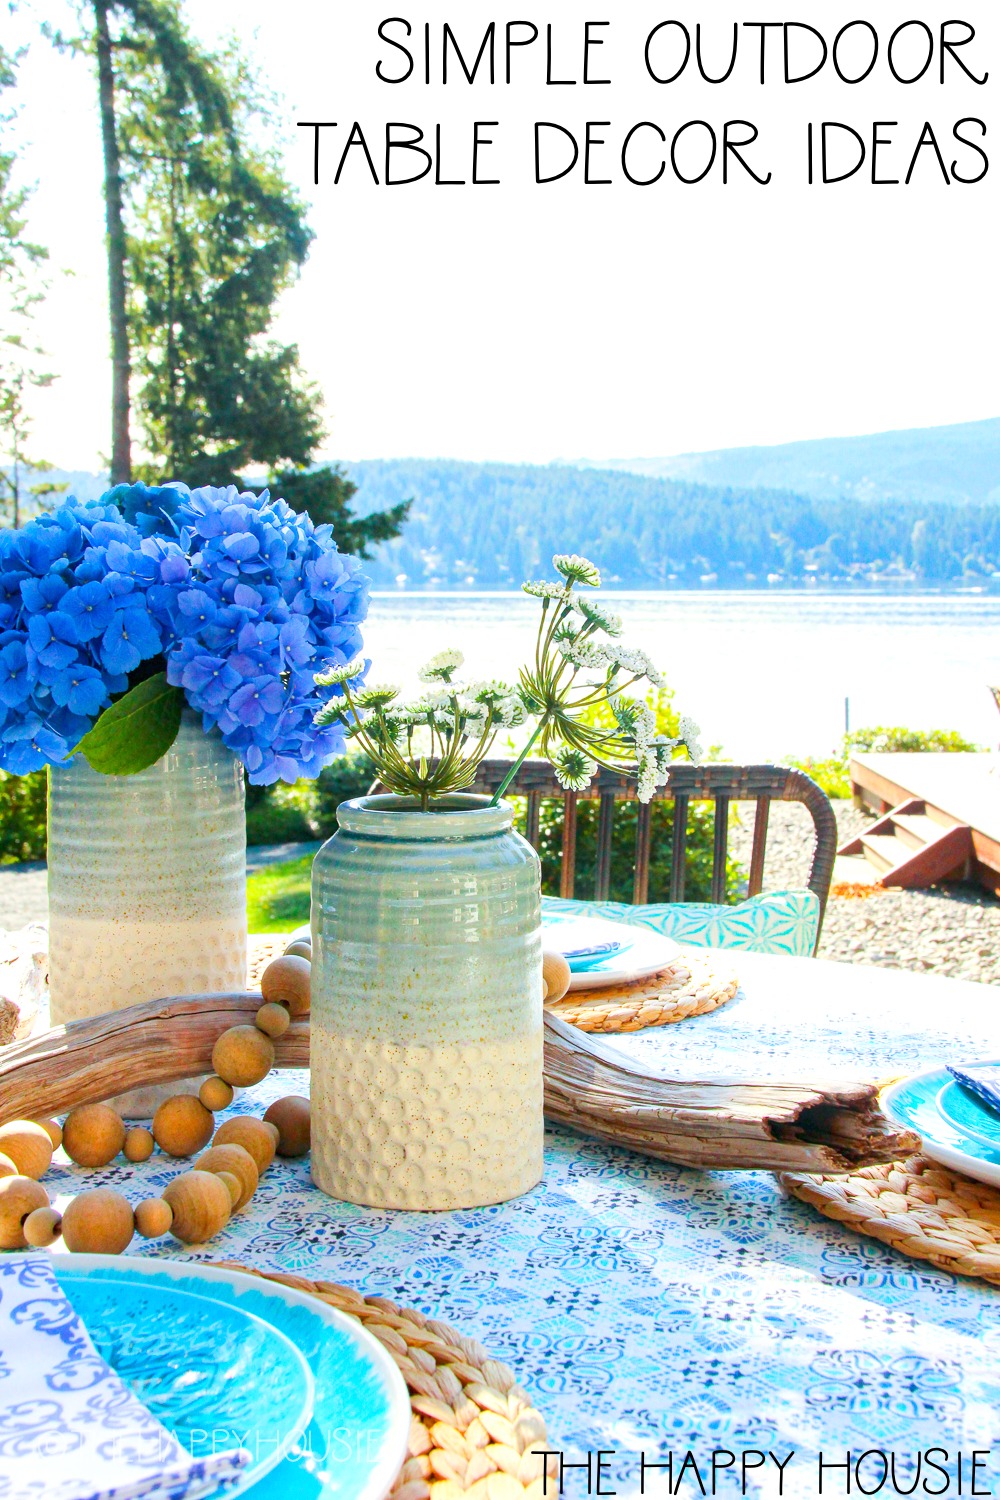 Simple Outdoor Table Decor Ideas graphic.